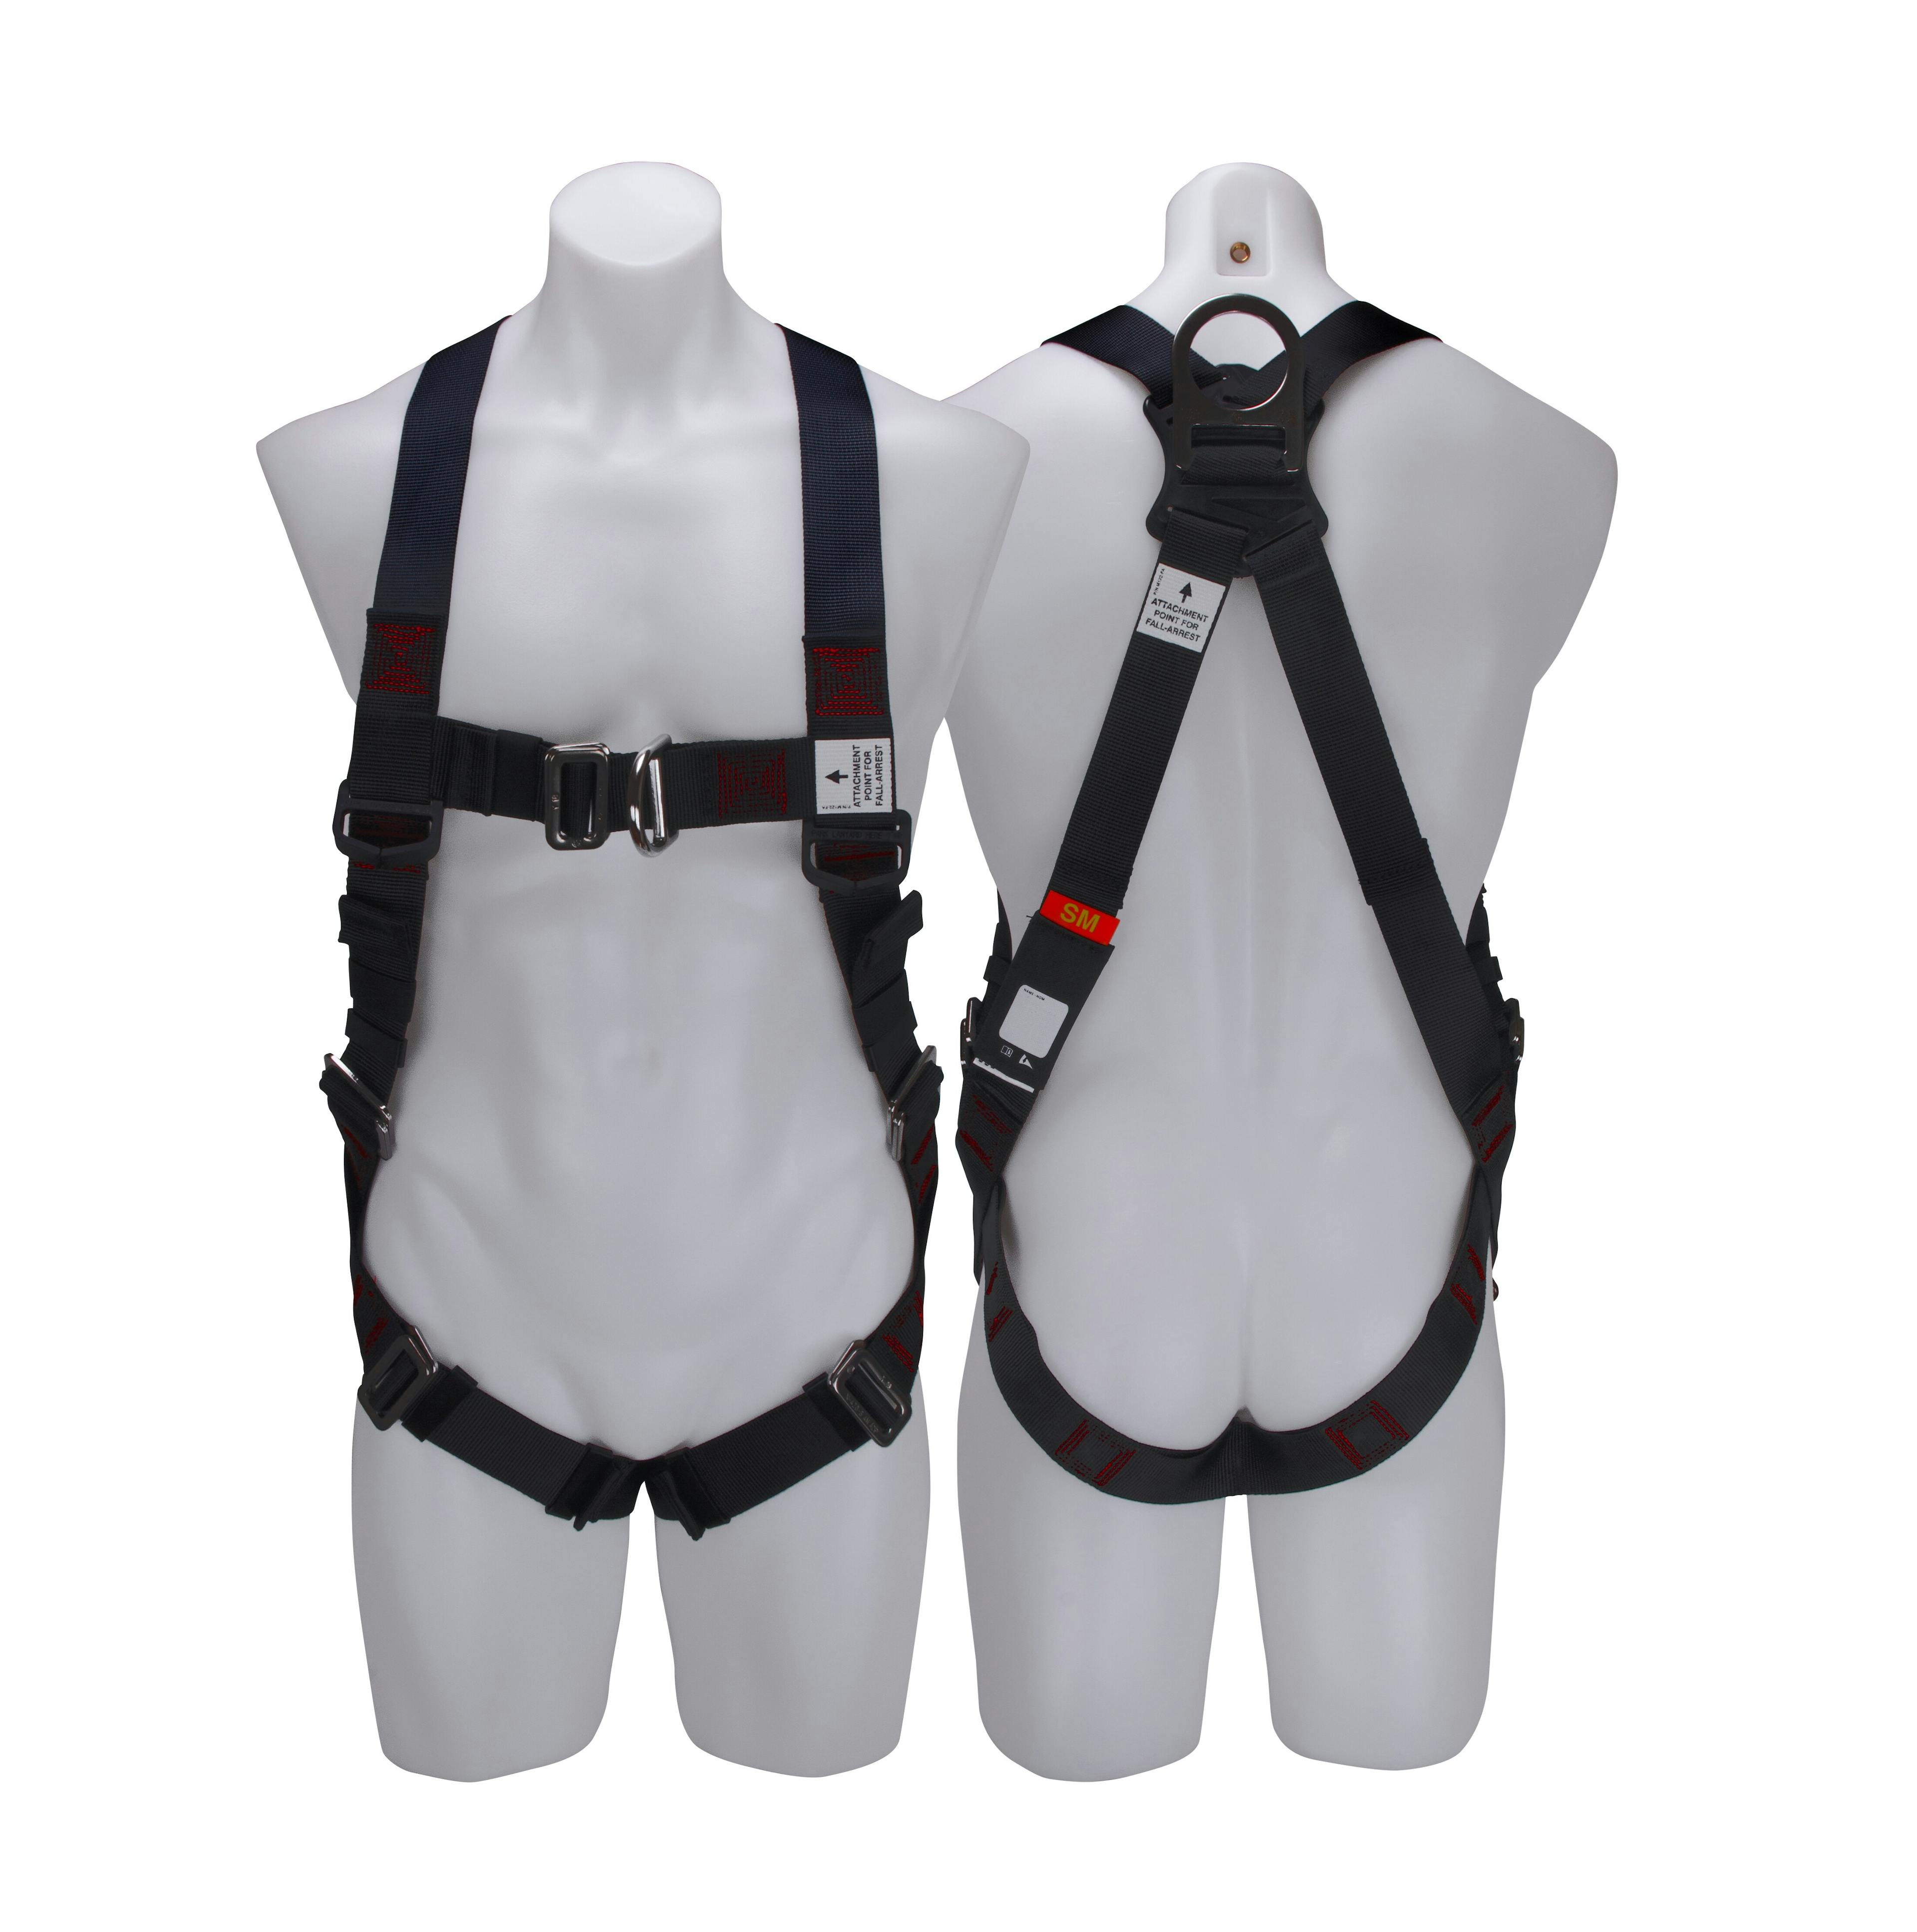 3M™ PROTECTA® X Riggers Harness with Stainless Steel and Pass Through Buckles 1161662, Red and Black, Large, 1 EA/Case